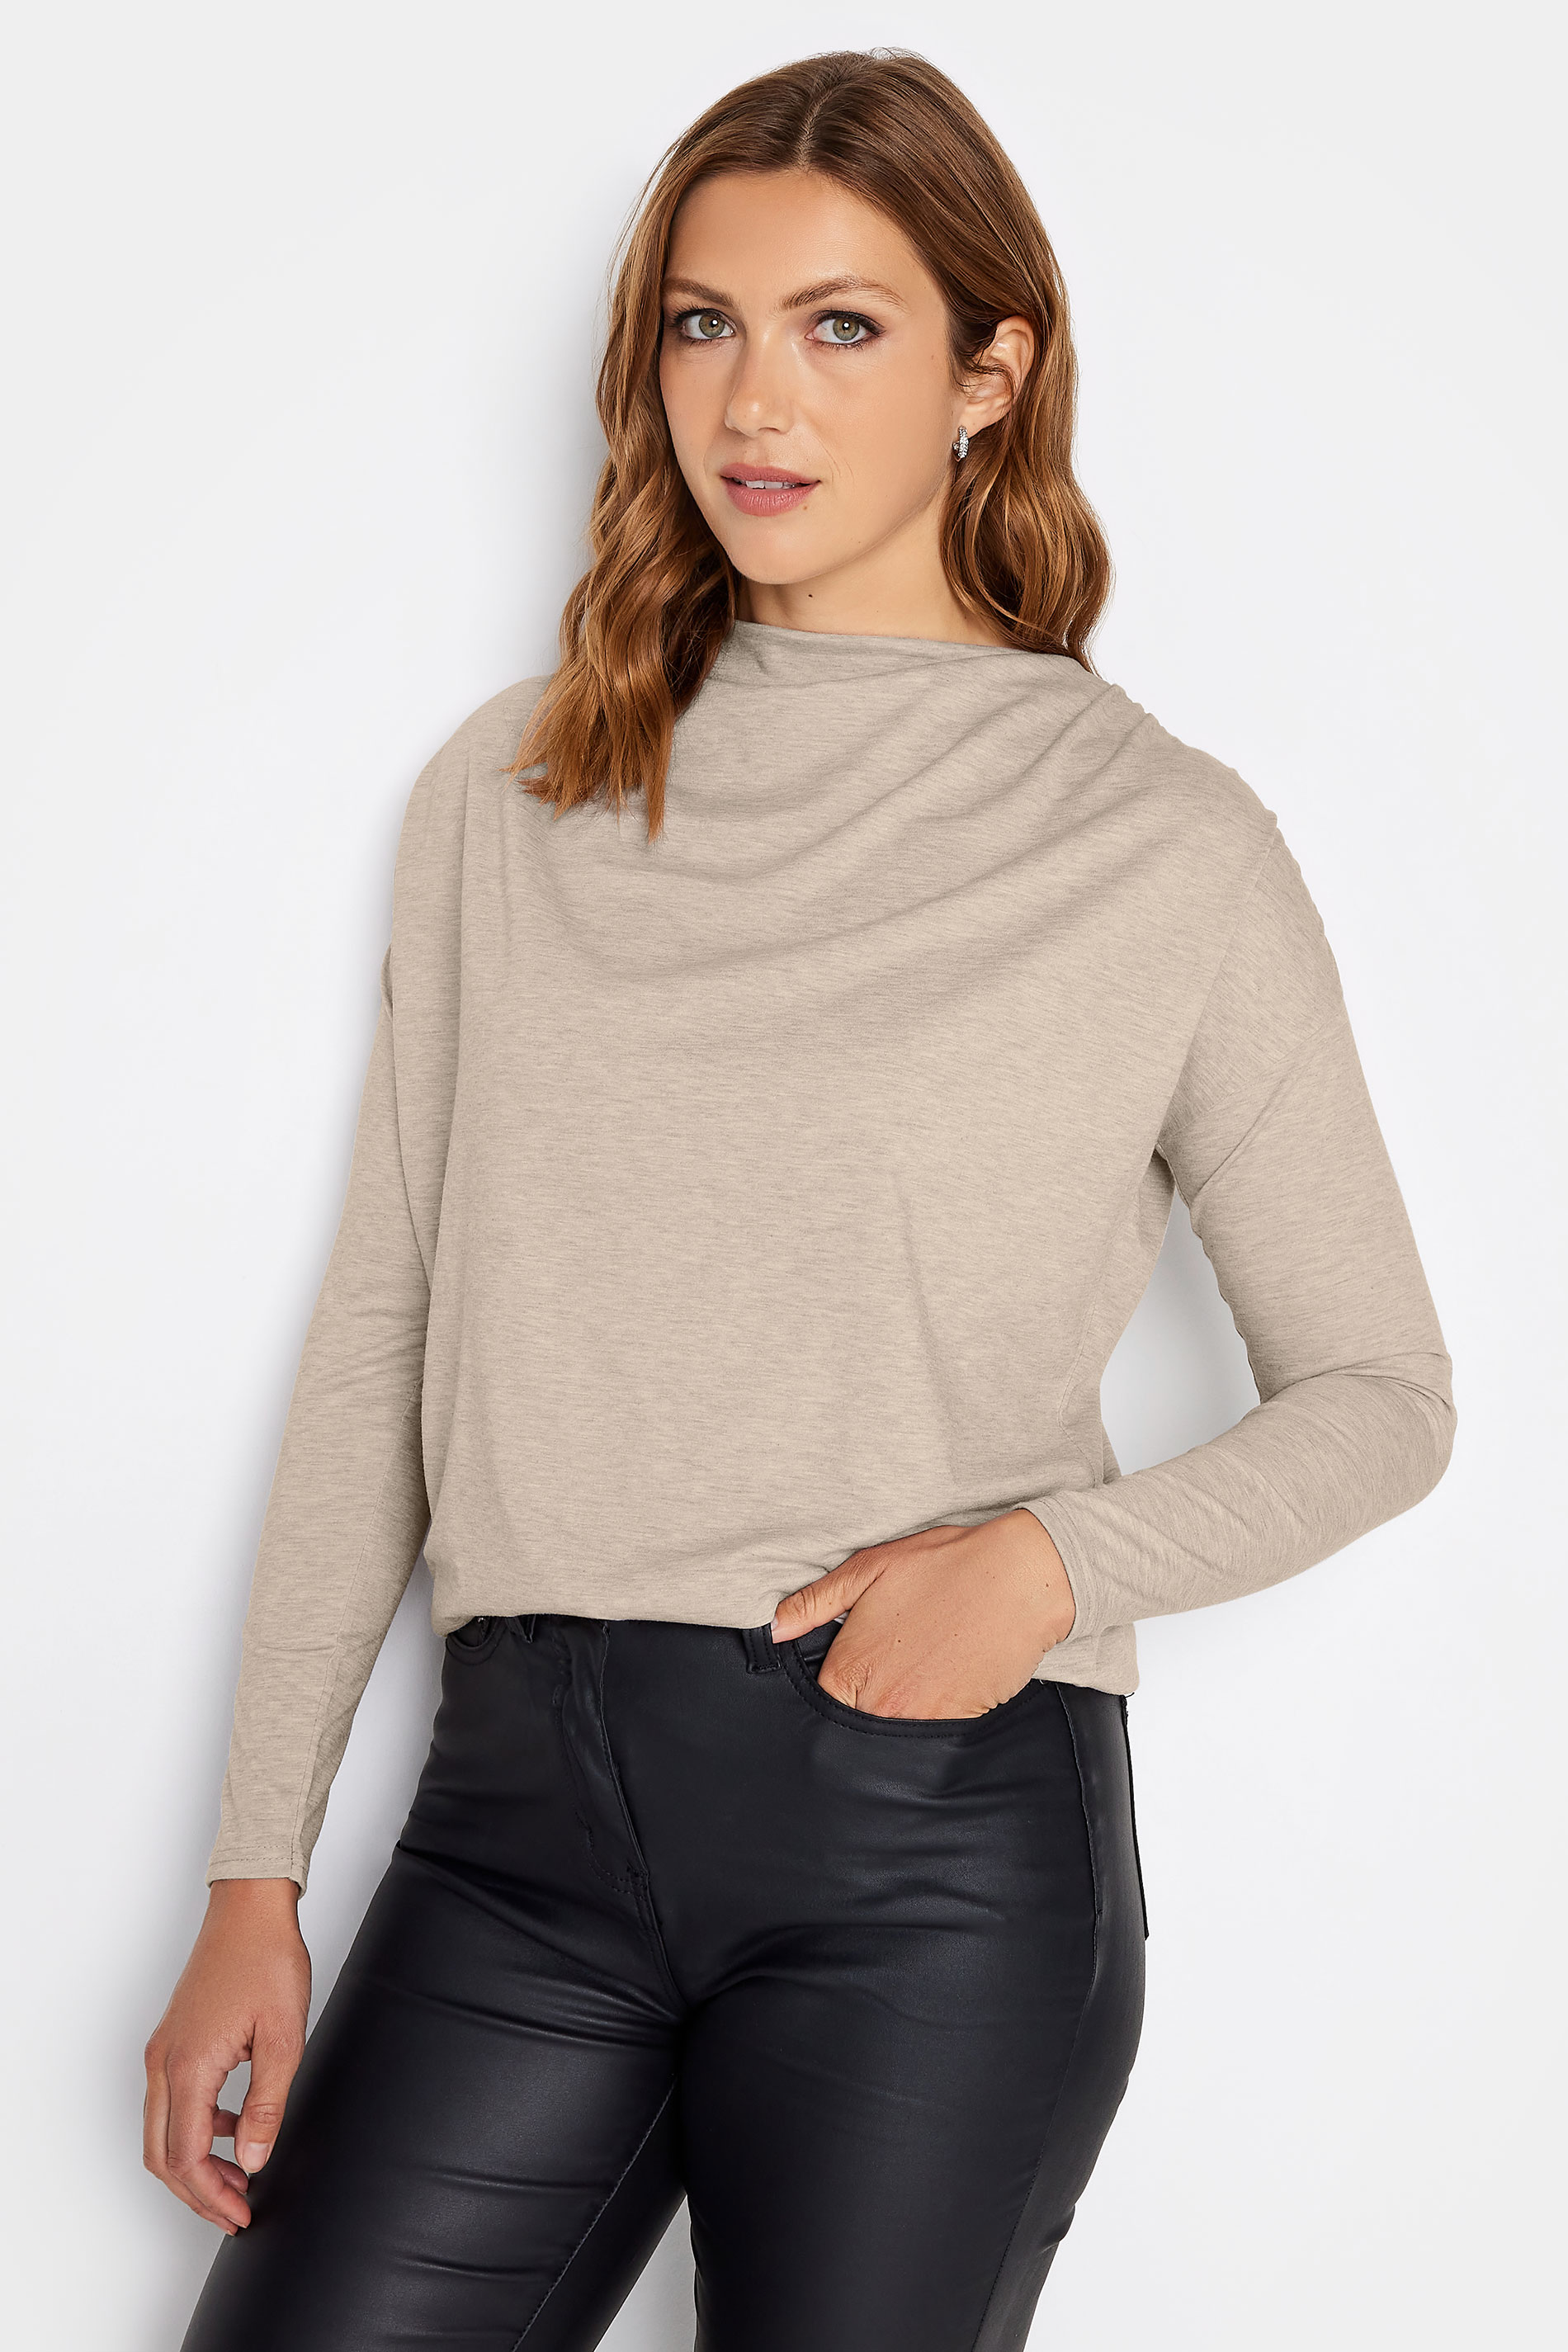 LTS Tall Oatmeal Cream Ruched Neck Top | Long Tall Sally 1